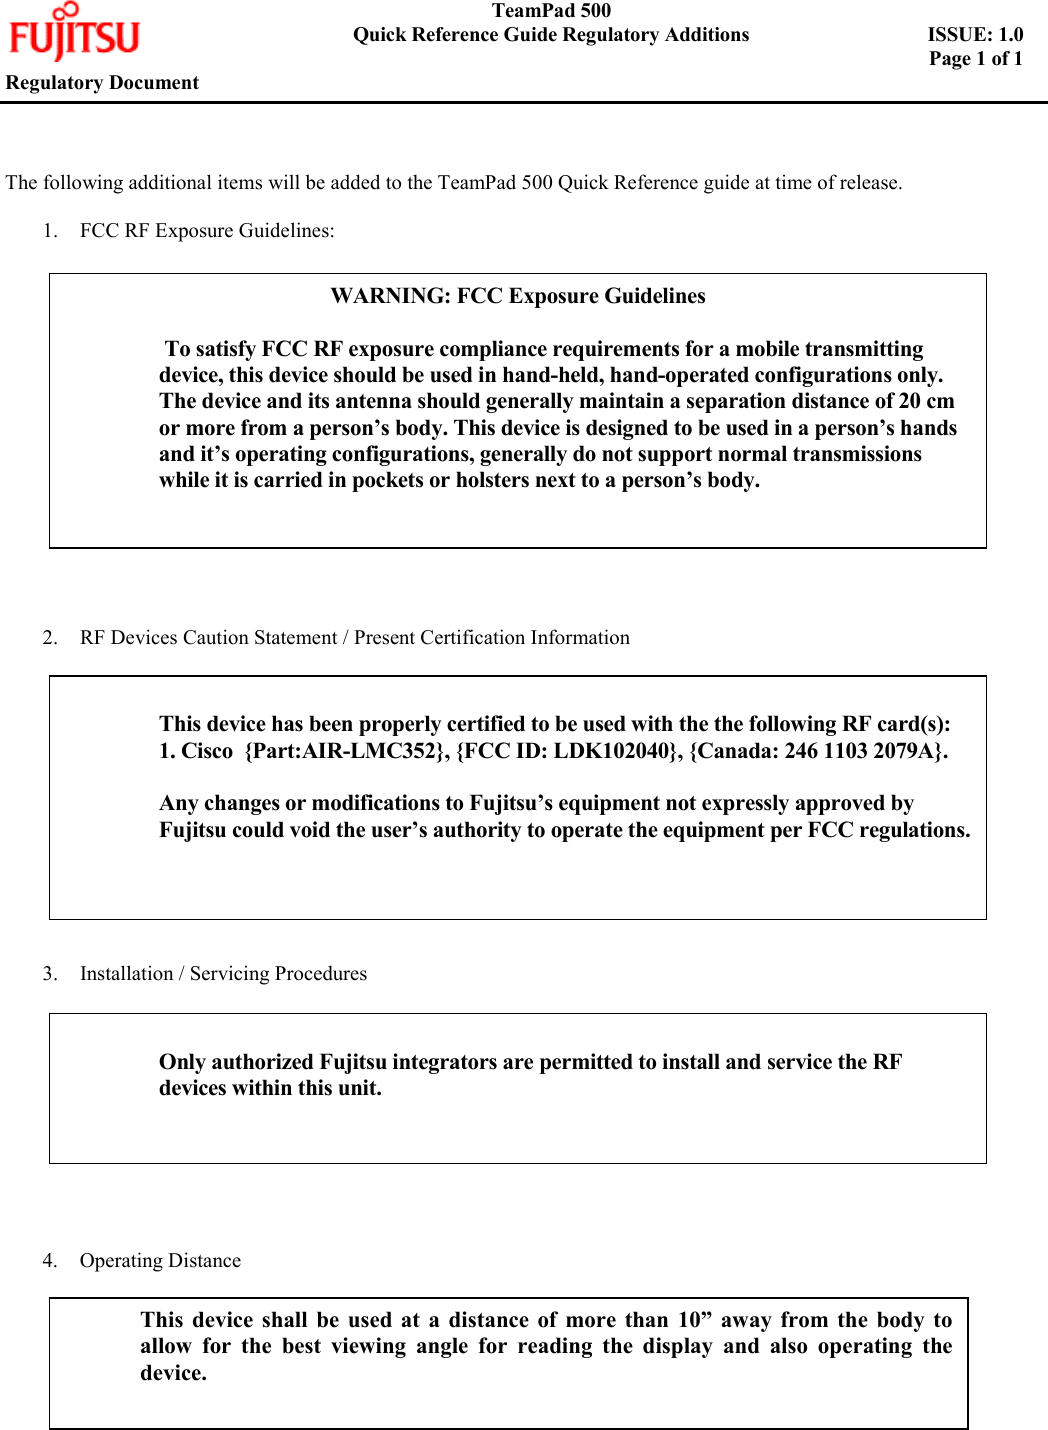    TeamPad 500       Quick Reference Guide Regulatory Additions    ISSUE: 1.0        Page 1 of 1   Regulatory Document     The following additional items will be added to the TeamPad 500 Quick Reference guide at time of release.  1.  FCC RF Exposure Guidelines:                  2.  RF Devices Caution Statement / Present Certification Information              3.  Installation / Servicing Procedures             4. Operating Distance    WARNING: FCC Exposure Guidelines   To satisfy FCC RF exposure compliance requirements for a mobile transmitting device, this device should be used in hand-held, hand-operated configurations only. The device and its antenna should generally maintain a separation distance of 20 cm or more from a person’s body. This device is designed to be used in a person’s hands and it’s operating configurations, generally do not support normal transmissions while it is carried in pockets or holsters next to a person’s body.   This device has been properly certified to be used with the the following RF card(s): 1. Cisco  {Part:AIR-LMC352}, {FCC ID: LDK102040}, {Canada: 246 1103 2079A}.  Any changes or modifications to Fujitsu’s equipment not expressly approved by Fujitsu could void the user’s authority to operate the equipment per FCC regulations.  Only authorized Fujitsu integrators are permitted to install and service the RF devices within this unit.  This device shall be used at a distance of more than 10” away from the body toallow for the best viewing angle for reading the display and also operating thedevice.   